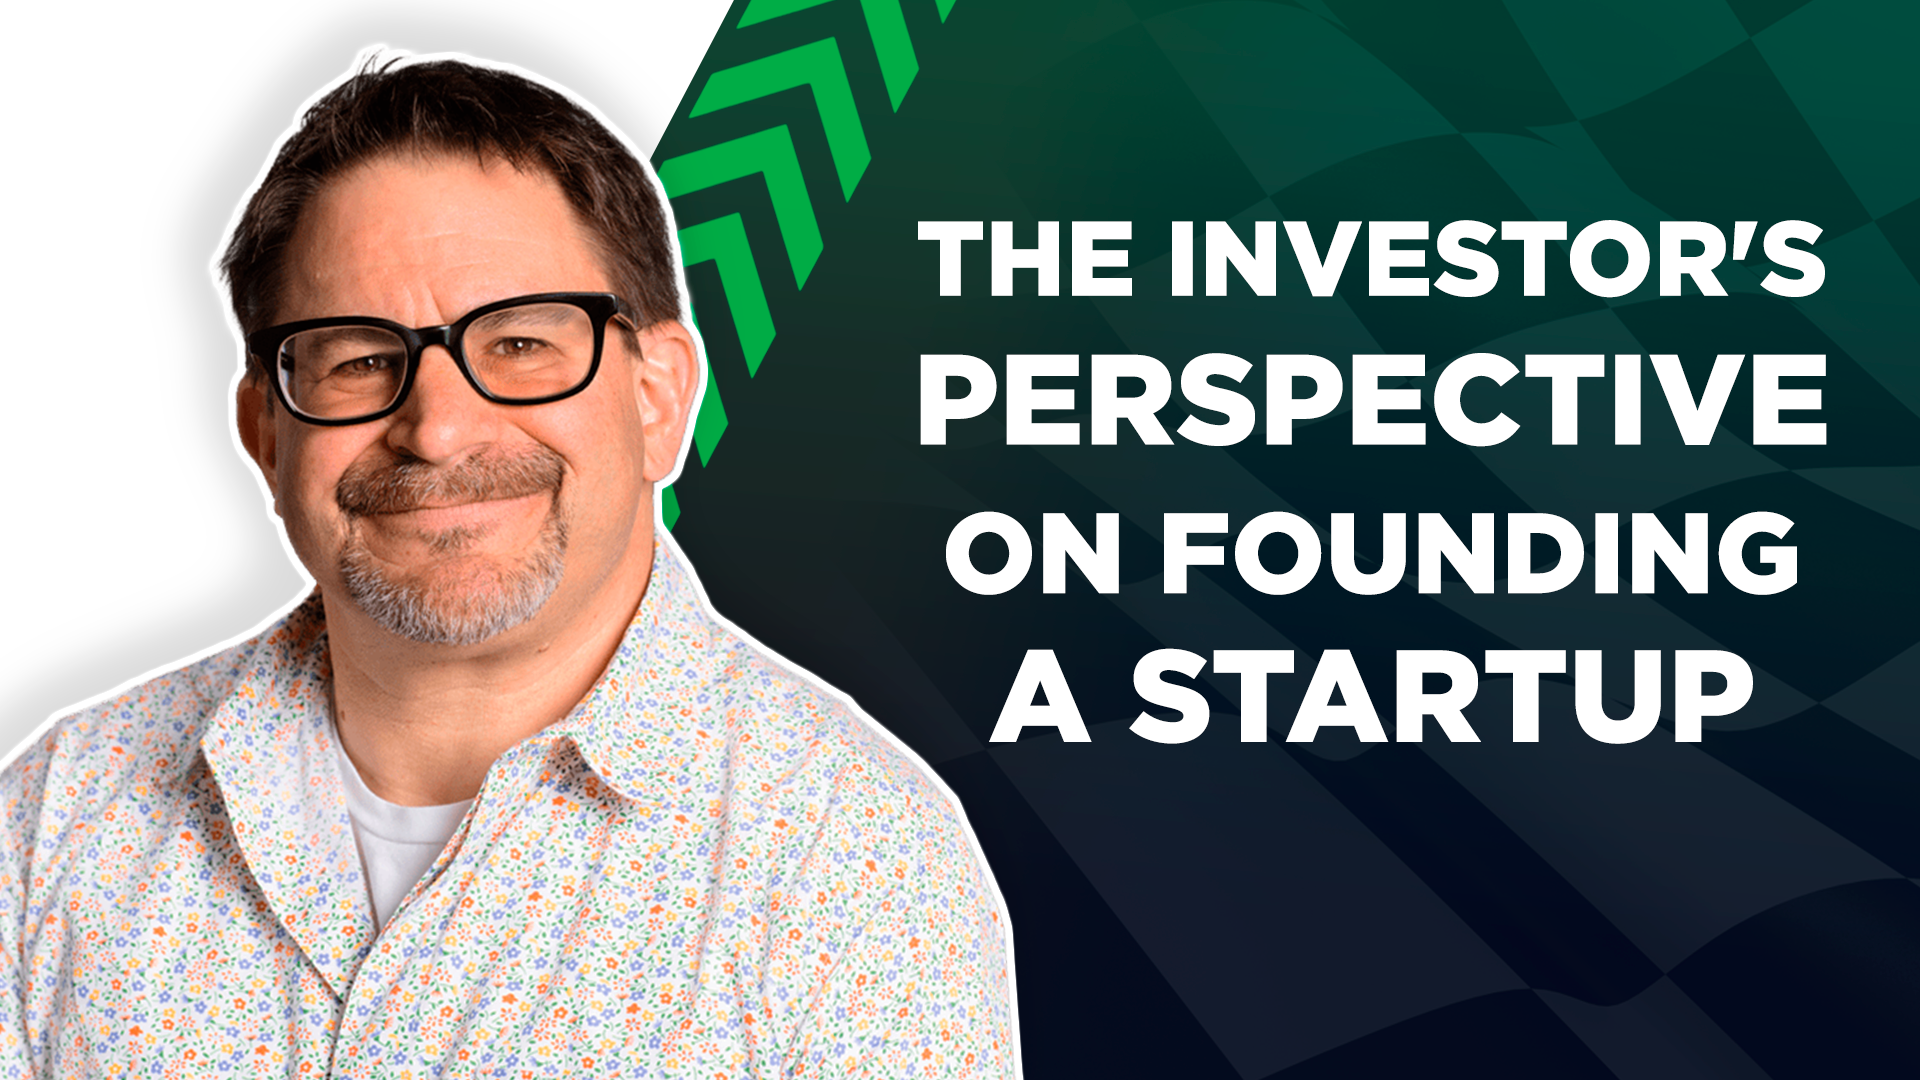 Podcast Pit Stop: David Hornik on The Investor's Perspective on Founding a Startup